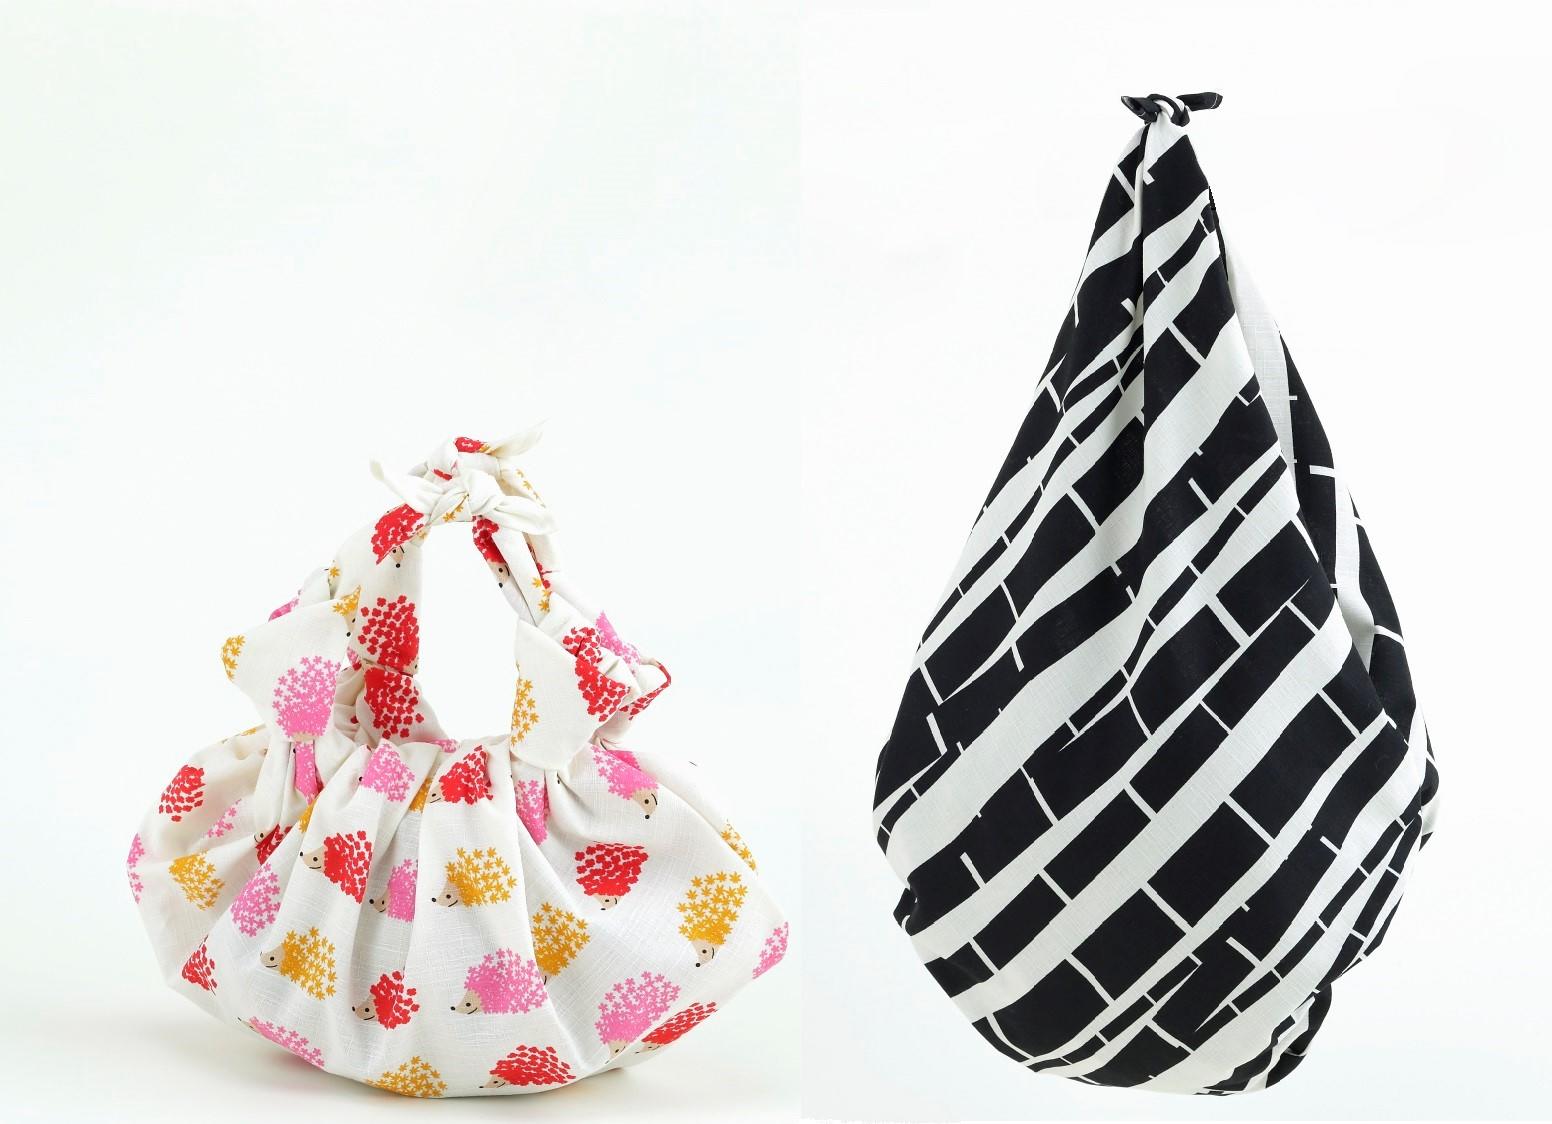 Furoshiki could be bag by just by tying